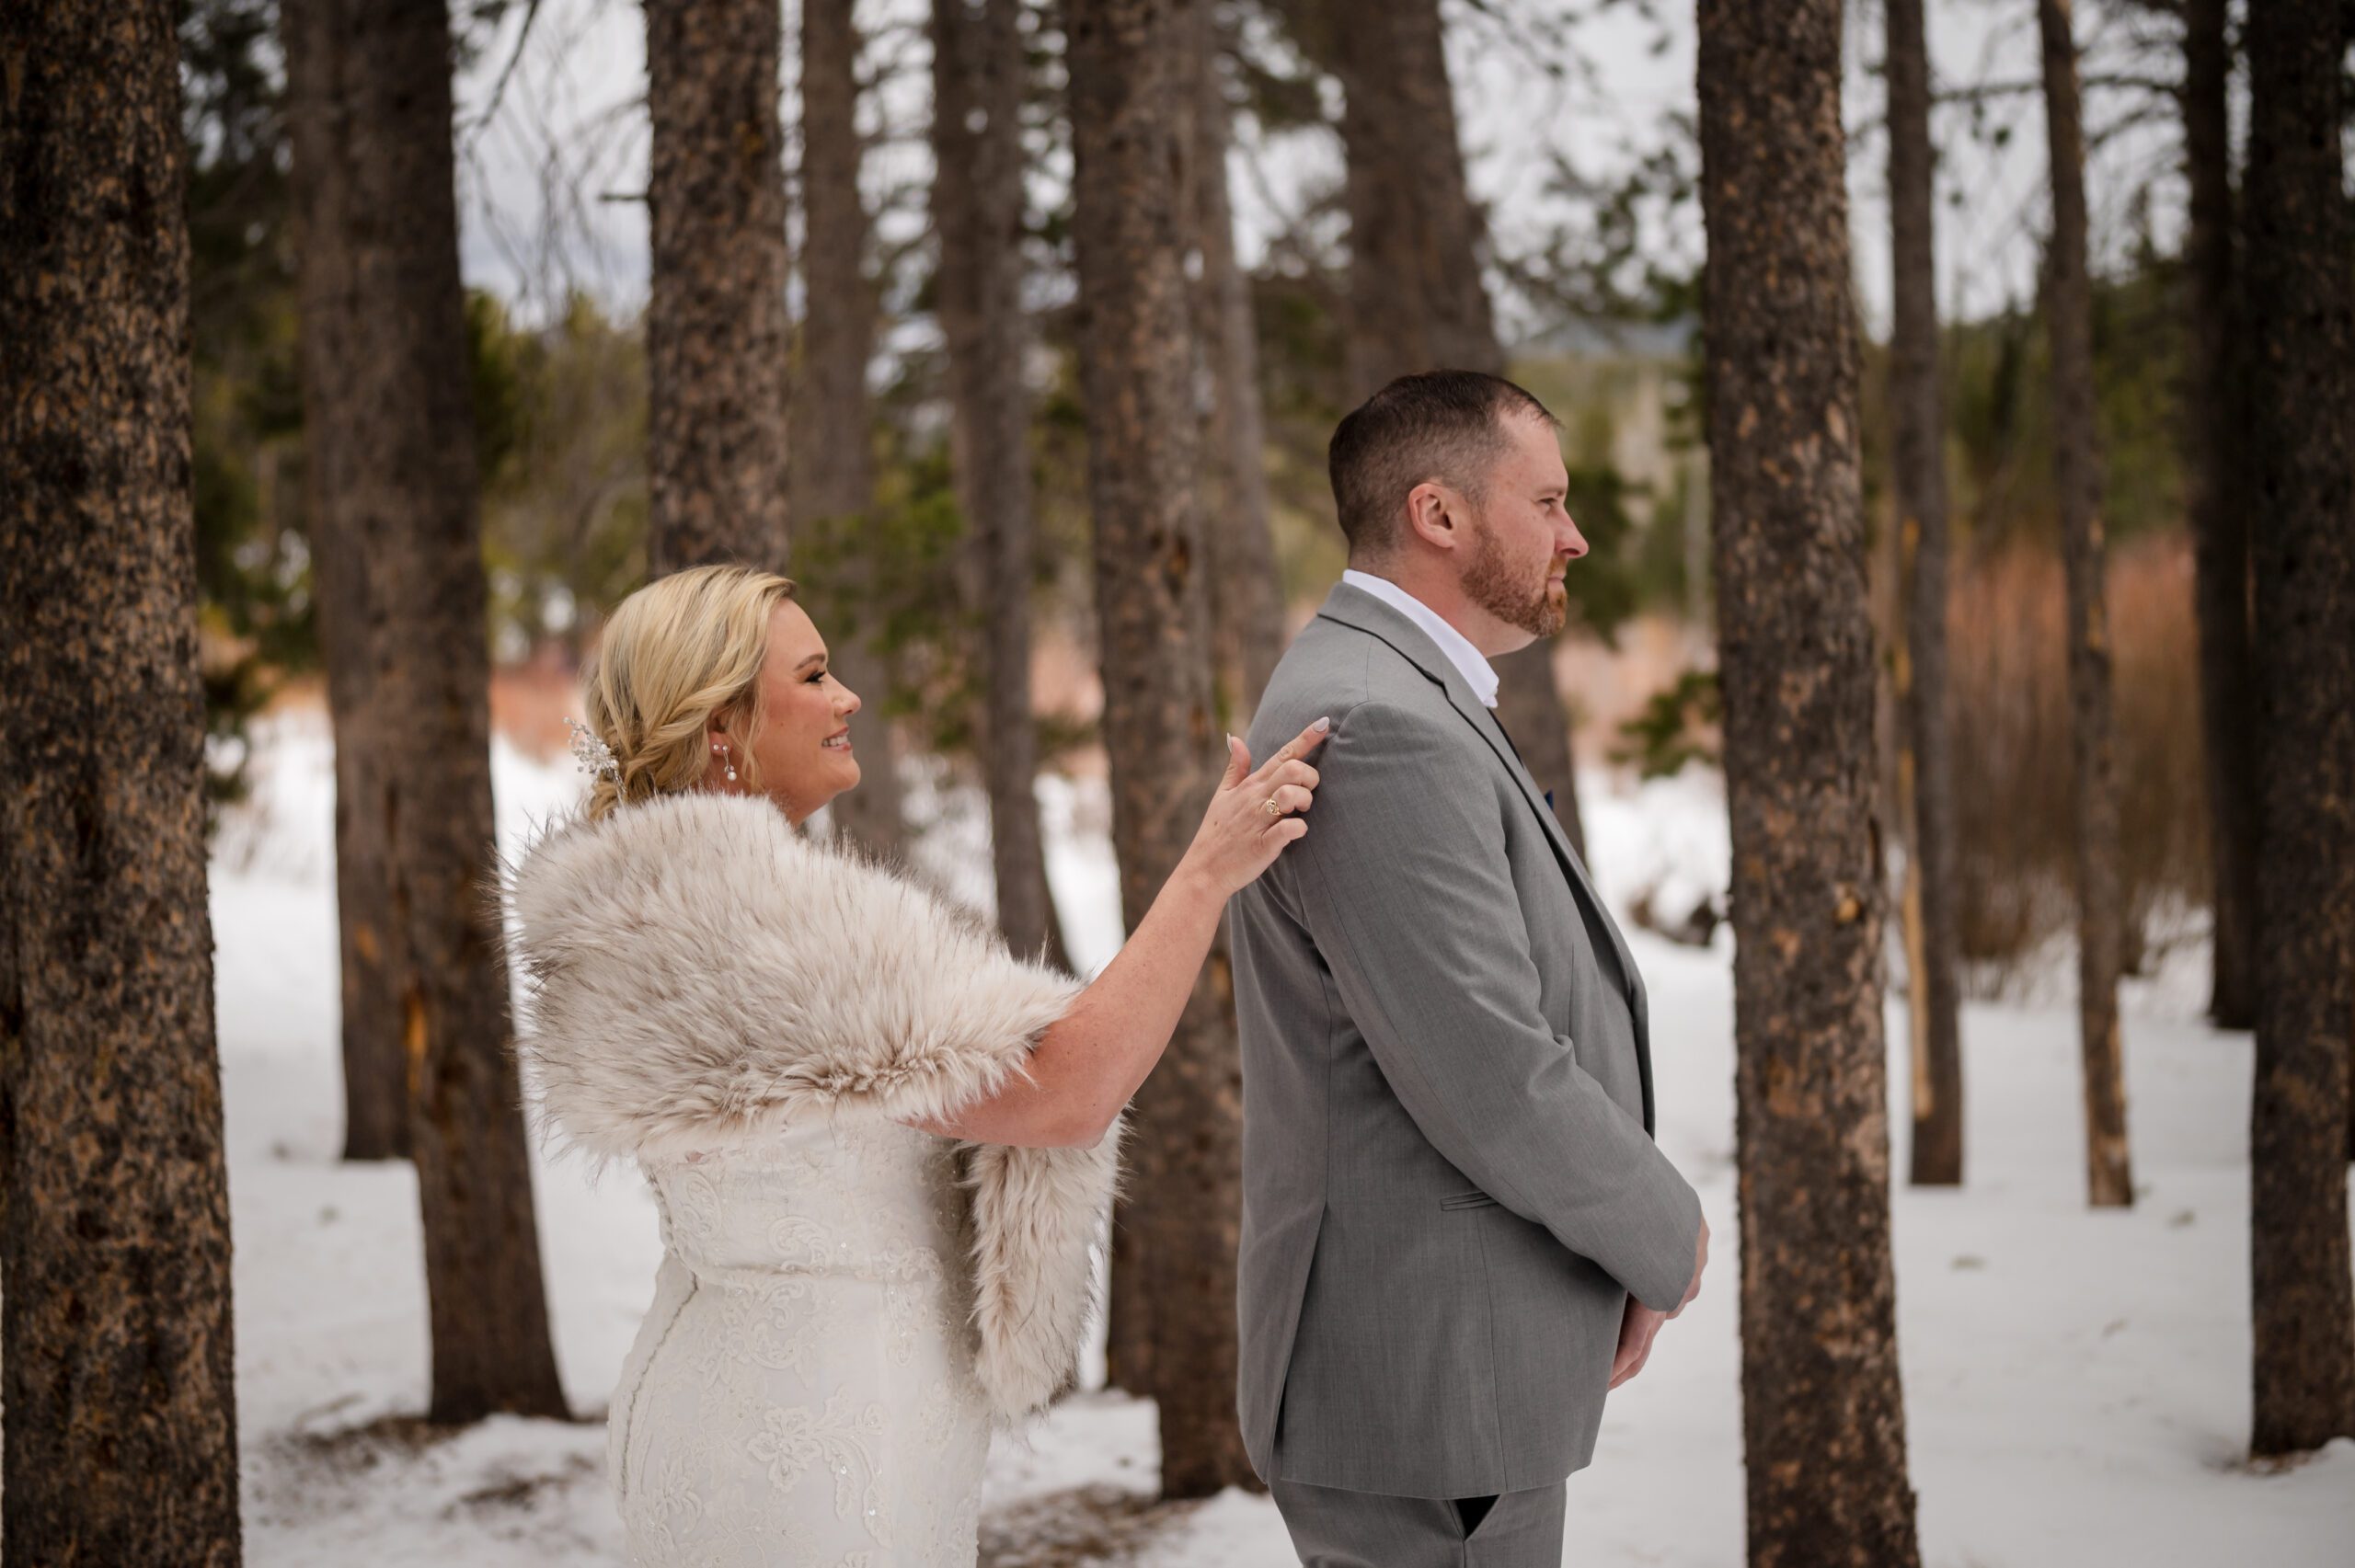 Bride taps her groom on the shoulder during their first look at their Winter Elopement at Sprague Lake.